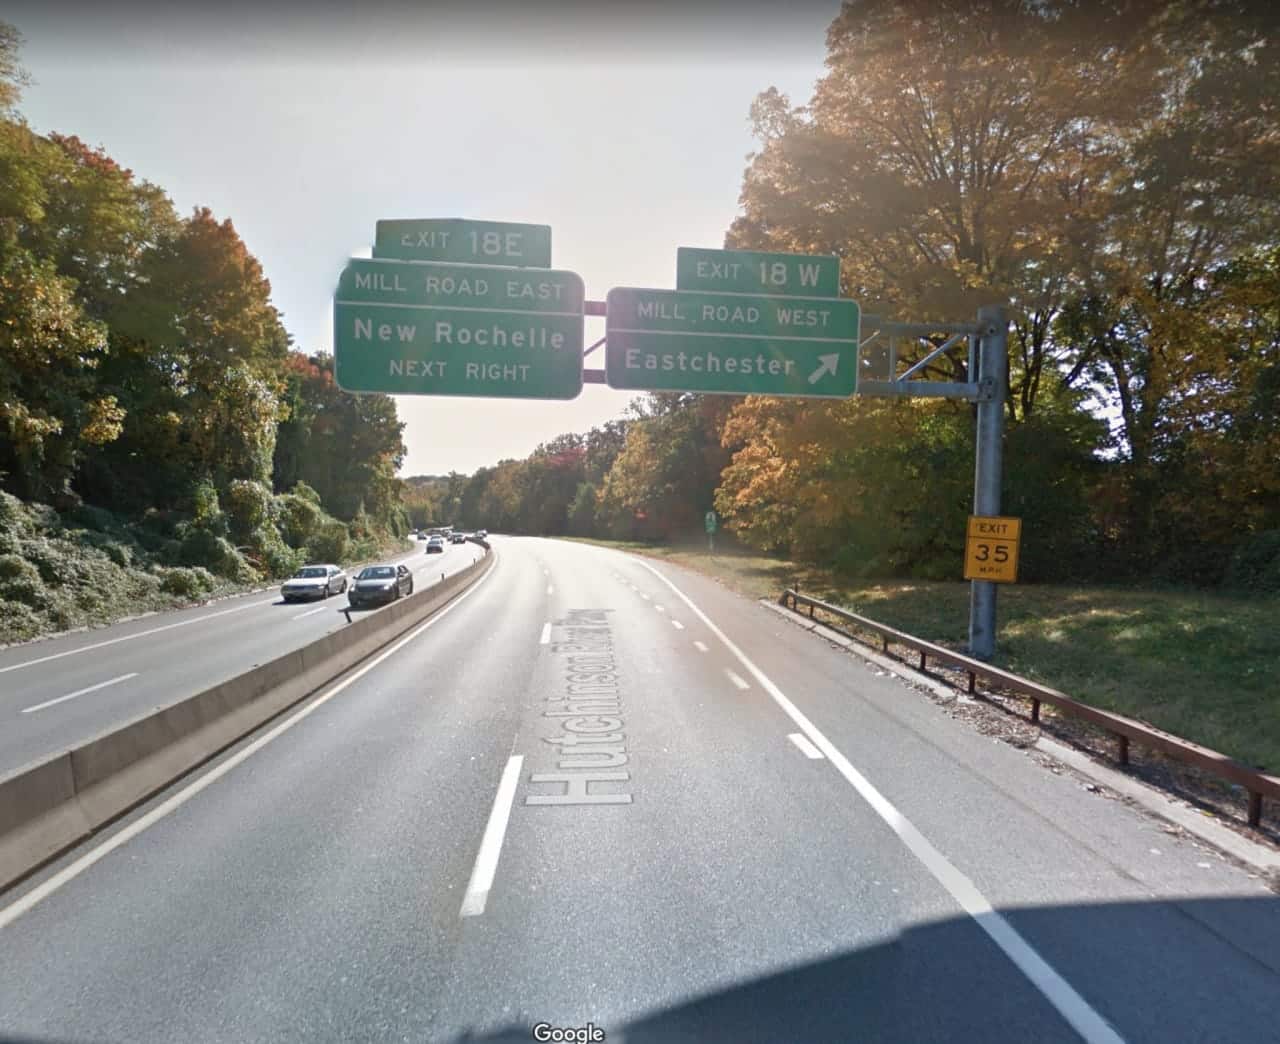 Exit 18 (Mill Road) will be closed on Wednesday and Thursday on the Hutchinson River Parkway in New Rochelle.